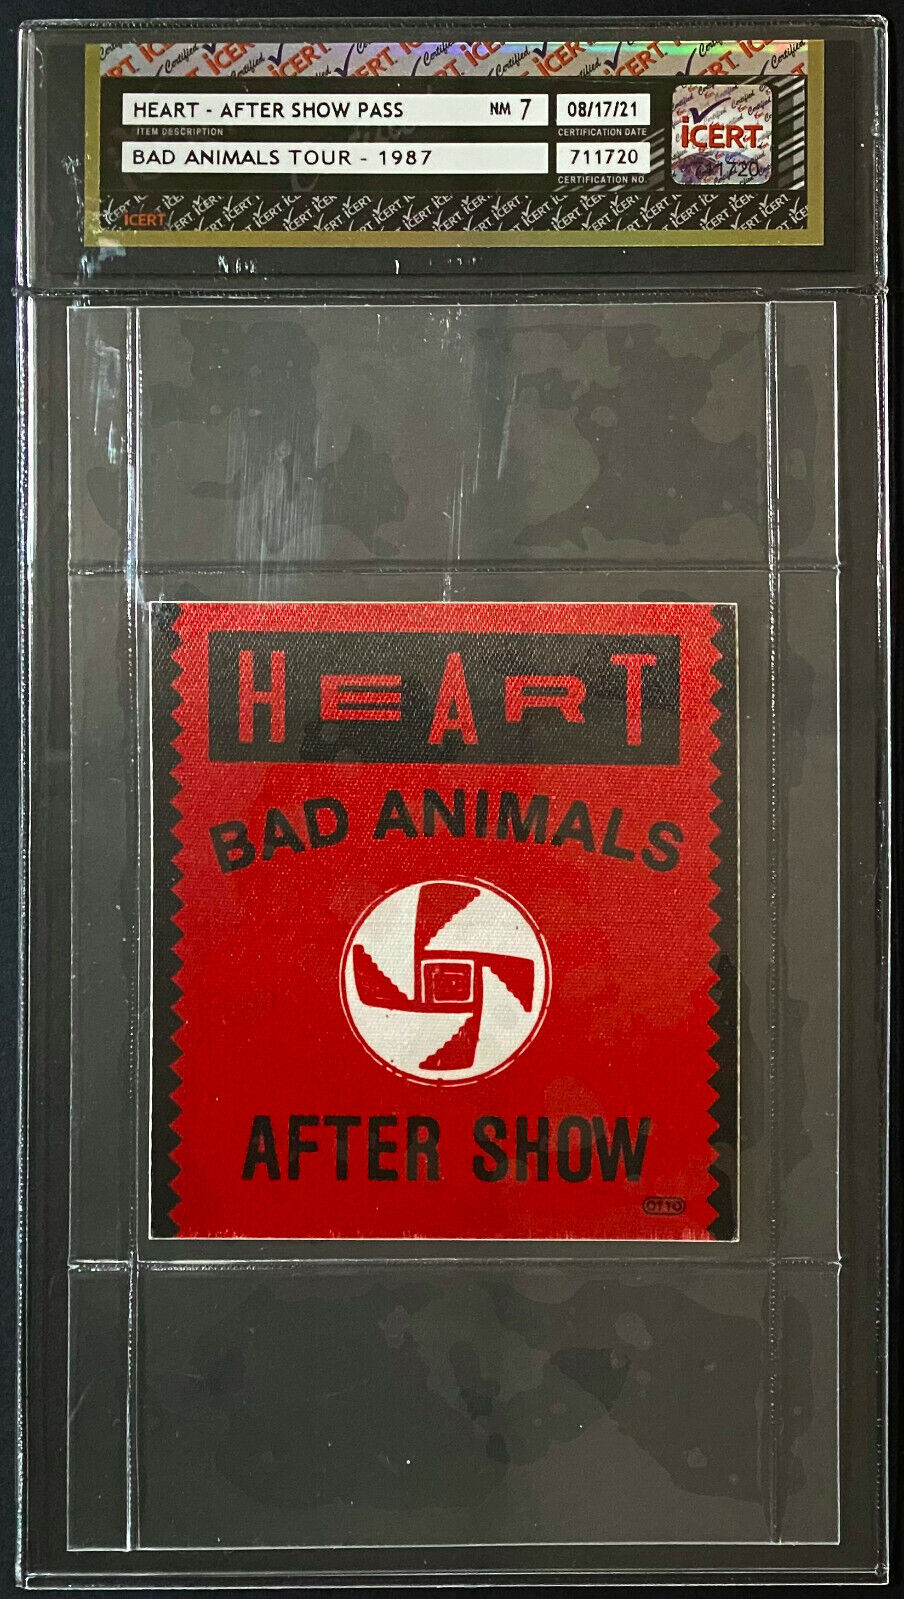 1987 Heart After Show Stage Pass Bad Animals Tour NM 7 iCert Vintage Music